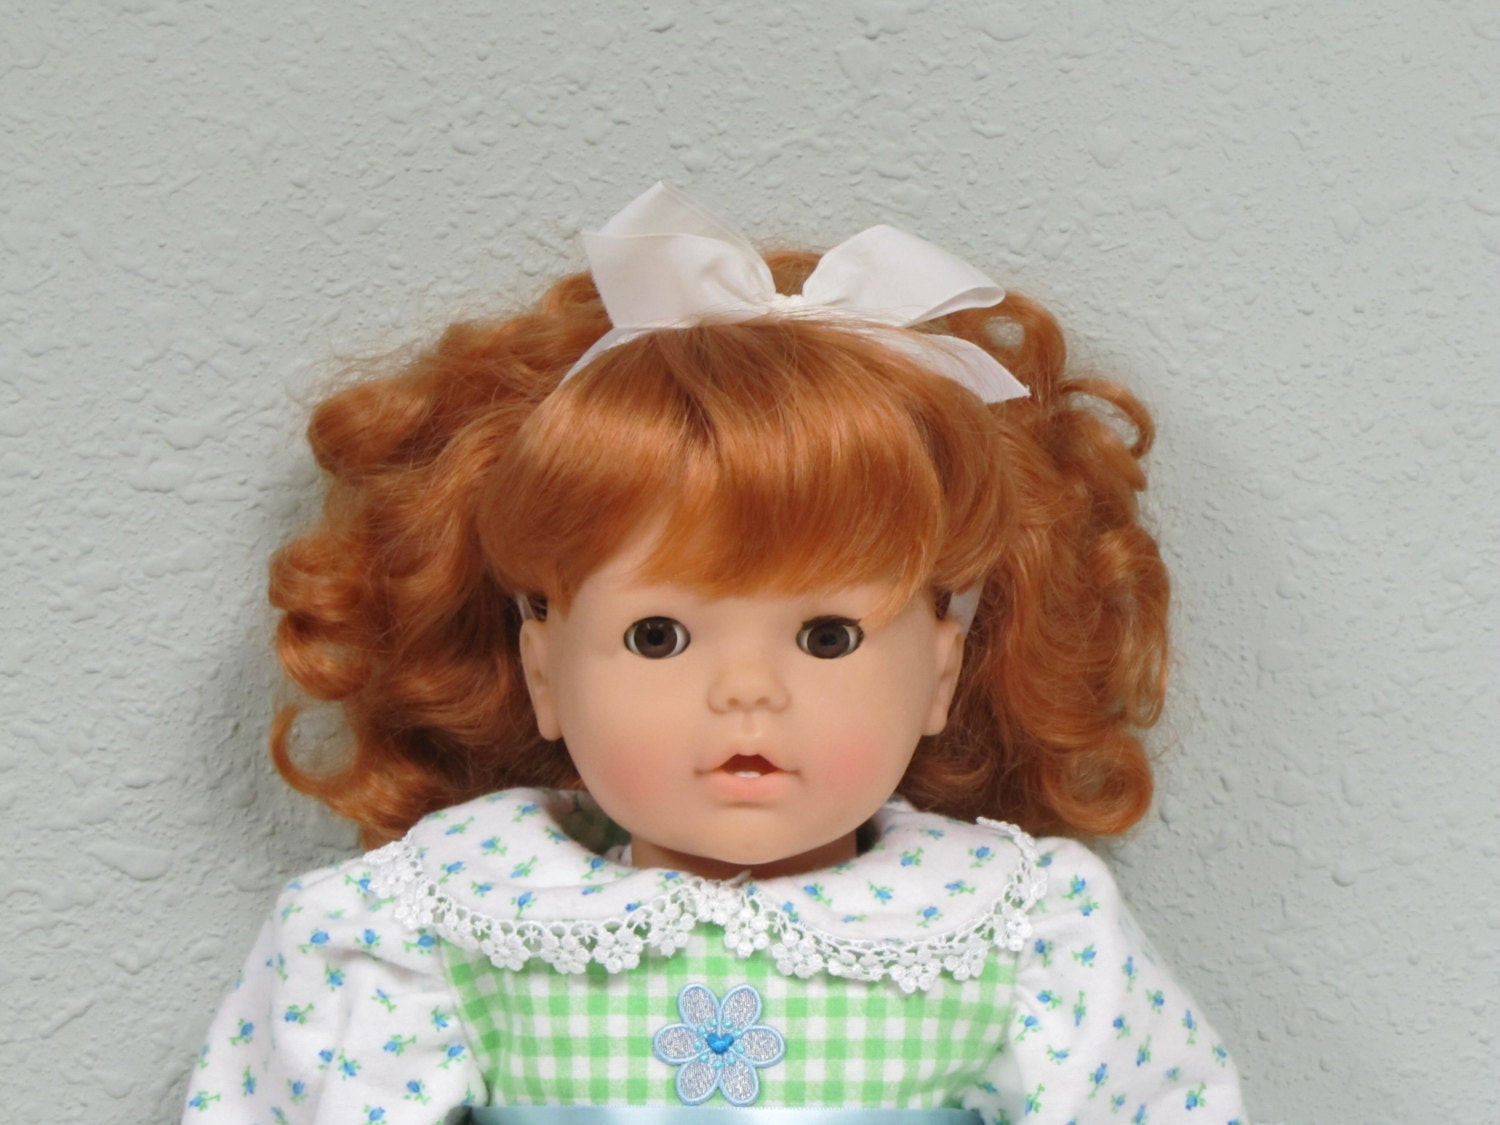 Baby Dolls With Red Hair
 Gotz Model doll vintage baby doll red curly hair soft body